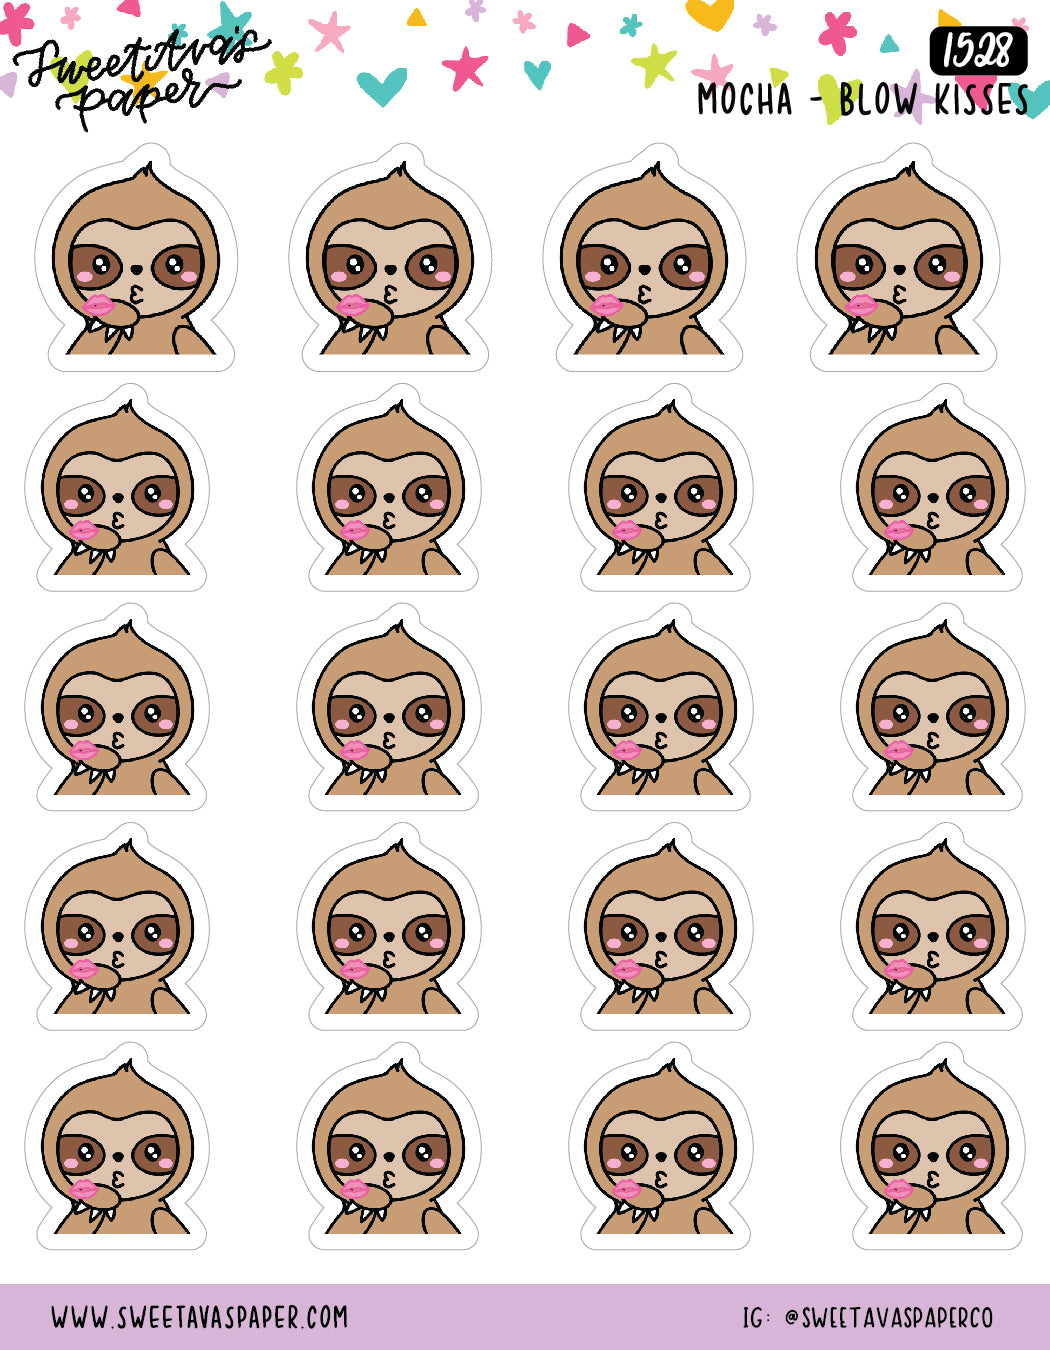 Blowing Kisses Planner Stickers - Mocha The Sloth [1528]